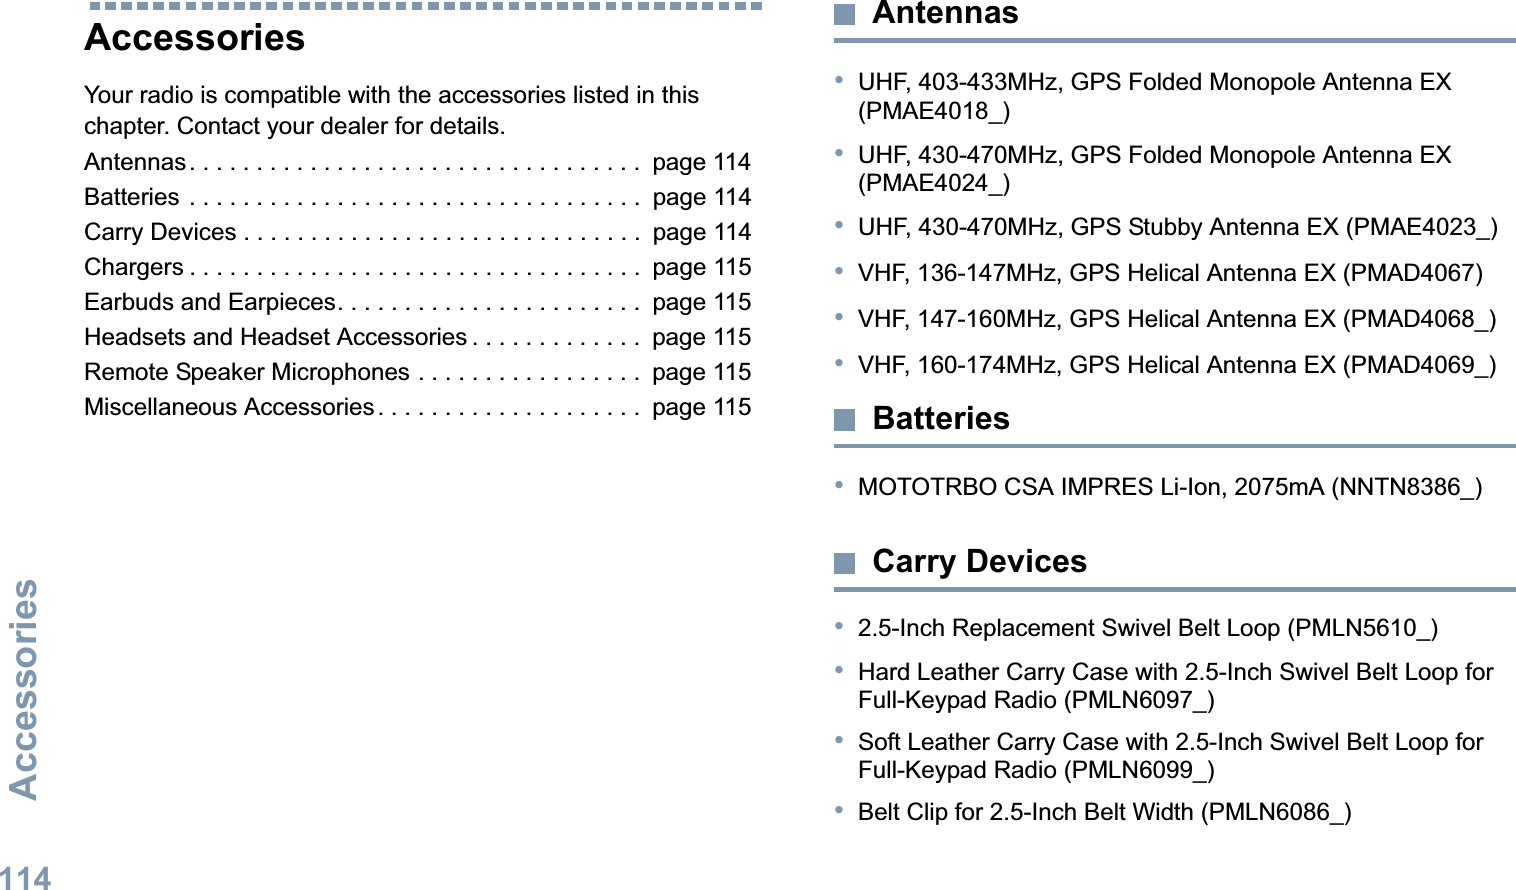 AccessoriesEnglish114AccessoriesYour radio is compatible with the accessories listed in this chapter. Contact your dealer for details.Antennas. . . . . . . . . . . . . . . . . . . . . . . . . . . . . . . . . .  page 114Batteries . . . . . . . . . . . . . . . . . . . . . . . . . . . . . . . . . .  page 114Carry Devices . . . . . . . . . . . . . . . . . . . . . . . . . . . . . .  page 114Chargers . . . . . . . . . . . . . . . . . . . . . . . . . . . . . . . . . .  page 115Earbuds and Earpieces. . . . . . . . . . . . . . . . . . . . . . .  page 115Headsets and Headset Accessories . . . . . . . . . . . . .  page 115Remote Speaker Microphones . . . . . . . . . . . . . . . . .  page 115Miscellaneous Accessories. . . . . . . . . . . . . . . . . . . .  page 115Antennas•UHF, 403-433MHz, GPS Folded Monopole Antenna EX (PMAE4018_)•UHF, 430-470MHz, GPS Folded Monopole Antenna EX (PMAE4024_)•UHF, 430-470MHz, GPS Stubby Antenna EX (PMAE4023_)•VHF, 136-147MHz, GPS Helical Antenna EX (PMAD4067)•VHF, 147-160MHz, GPS Helical Antenna EX (PMAD4068_)•VHF, 160-174MHz, GPS Helical Antenna EX (PMAD4069_)Batteries•MOTOTRBO CSA IMPRES Li-Ion, 2075mA (NNTN8386_)Carry Devices•2.5-Inch Replacement Swivel Belt Loop (PMLN5610_)•Hard Leather Carry Case with 2.5-Inch Swivel Belt Loop for Full-Keypad Radio (PMLN6097_)•Soft Leather Carry Case with 2.5-Inch Swivel Belt Loop for Full-Keypad Radio (PMLN6099_)•Belt Clip for 2.5-Inch Belt Width (PMLN6086_)